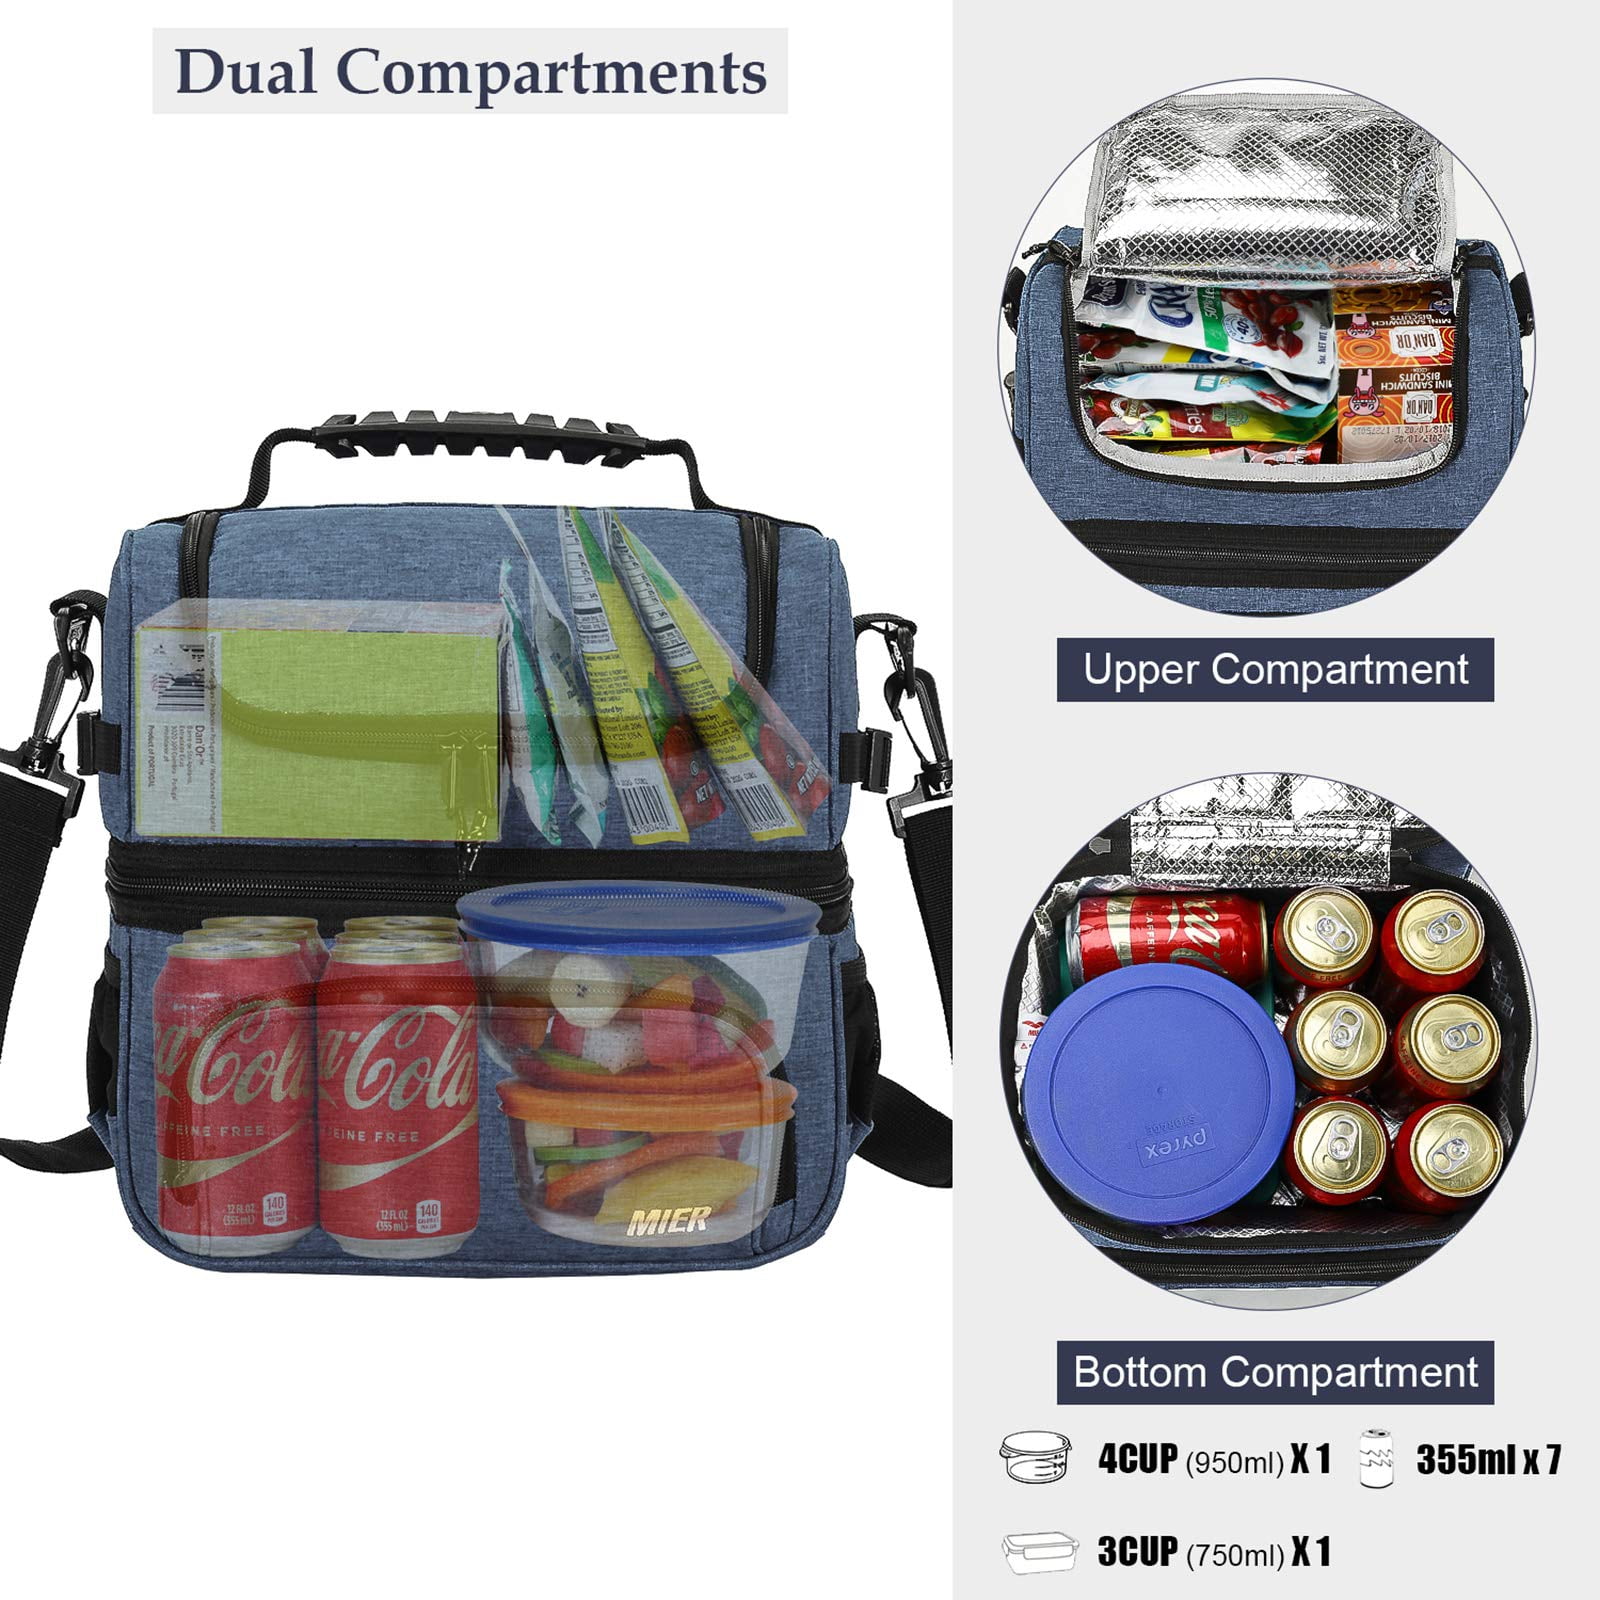 MIER Dual Compartment Lunch Bag Tote with Shoulder Strap for Men and Women Insulated Leakproof Cooler Bag Bluesteel